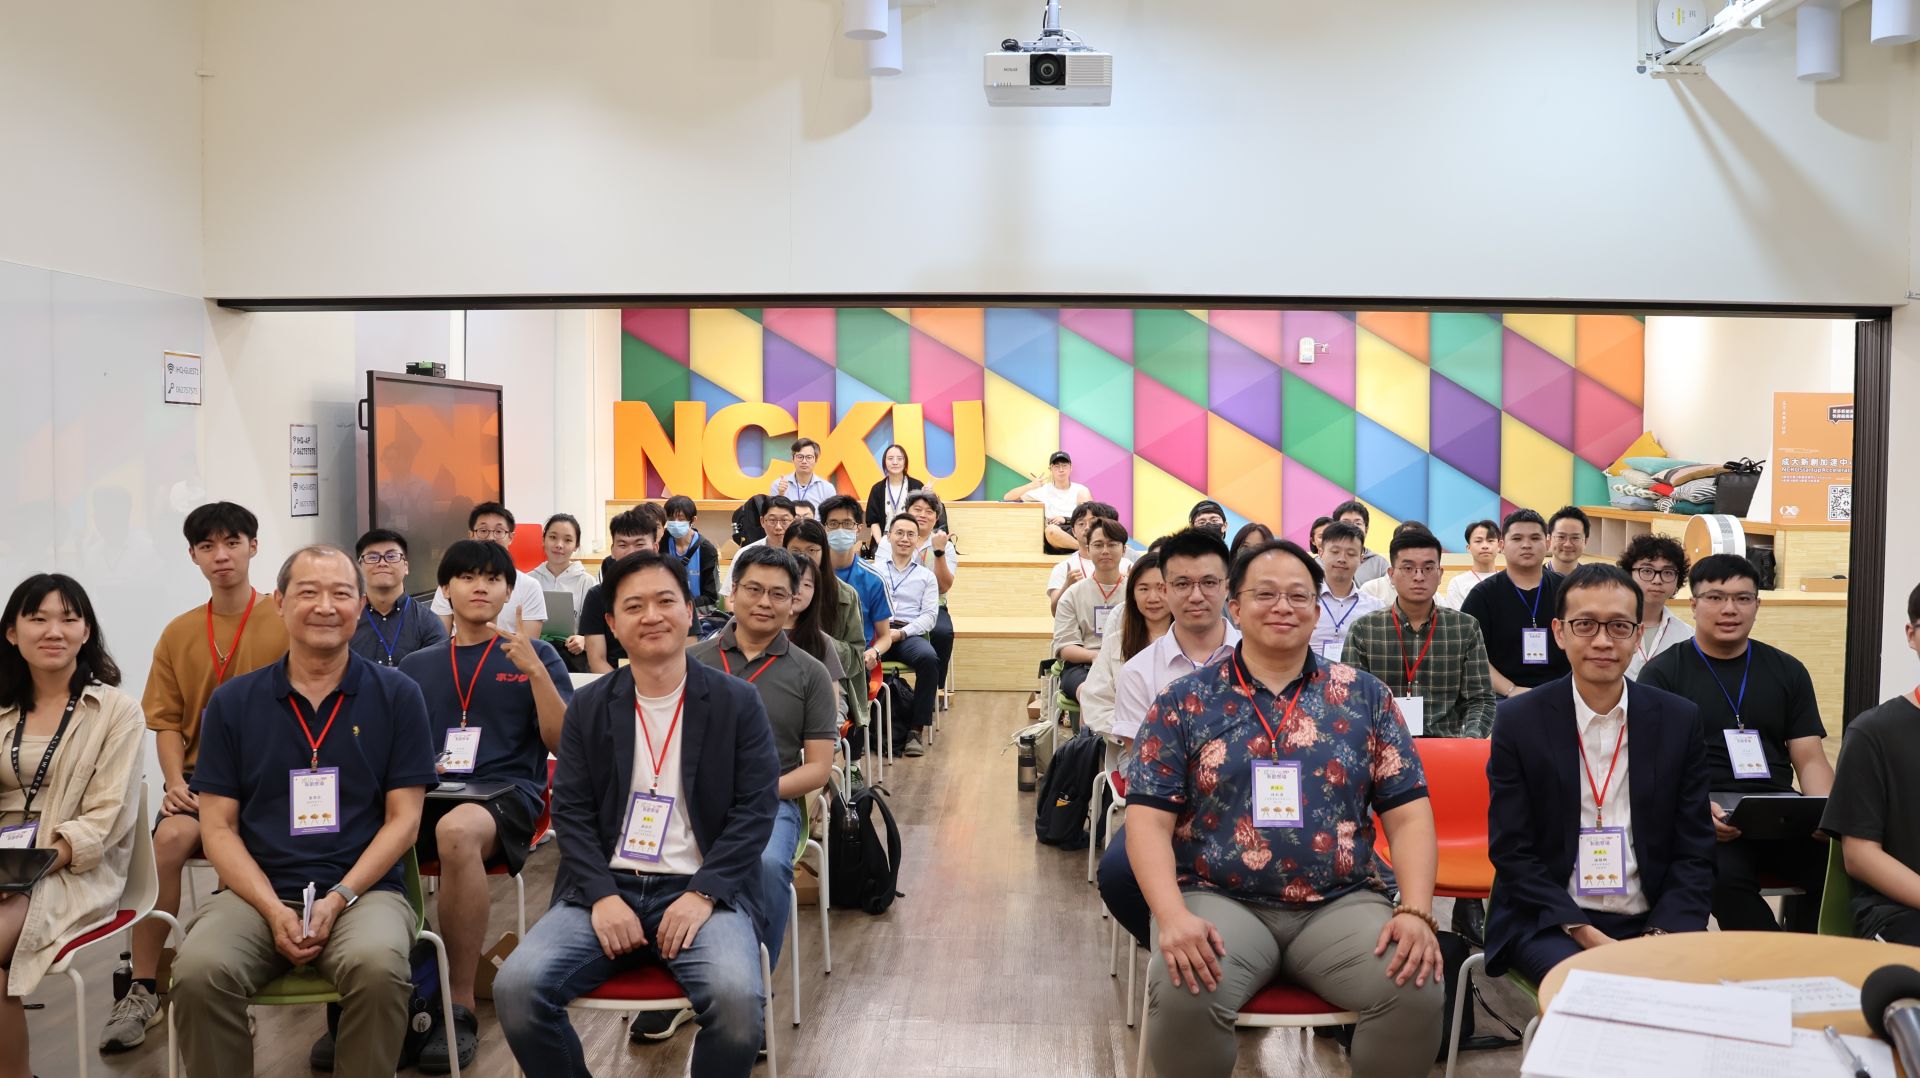 Cheng-Kung Startup event concludes as NCKU's innovation center and Phoenix startup platform empower campus startups.